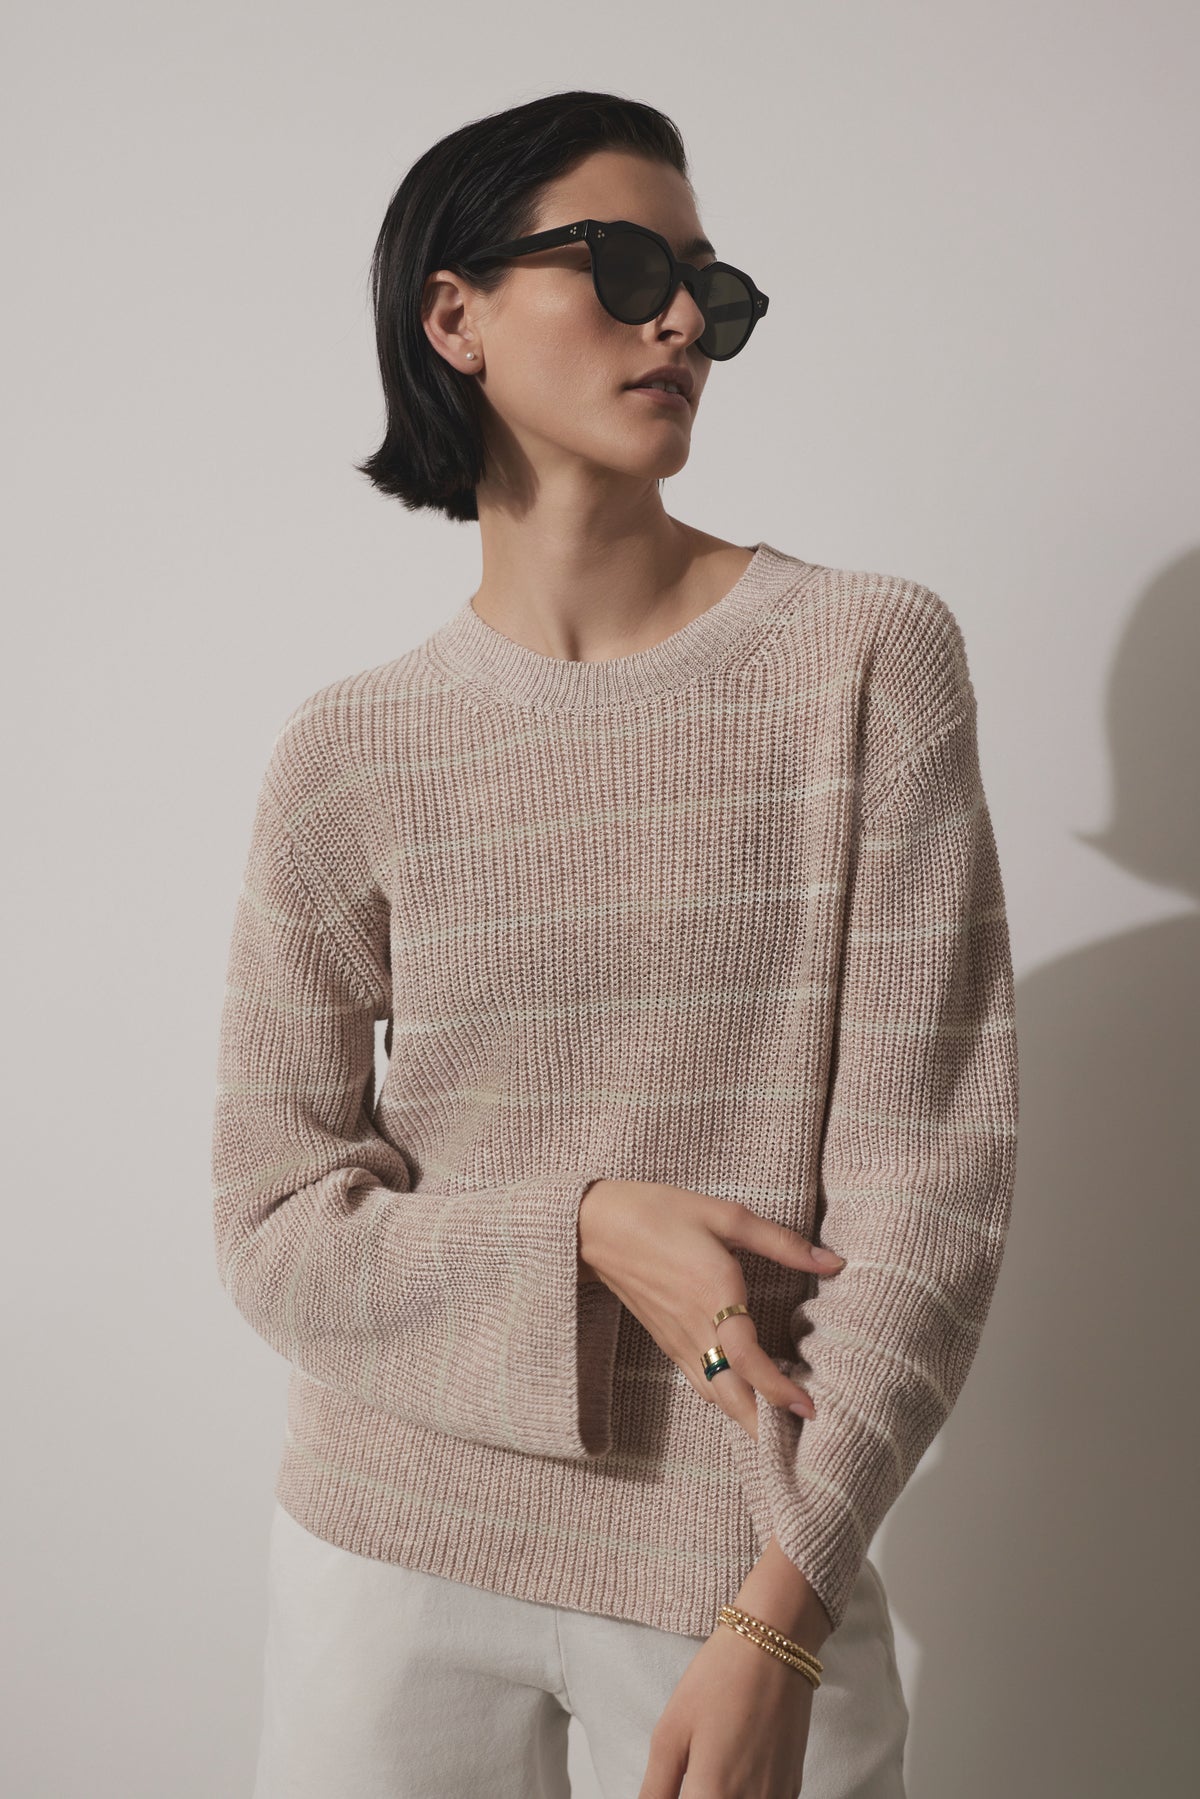 A stylish woman wearing a Velvet by Jenny Graham INDIO LINEN SWEATER and sunglasses poses with one hand on her hip against a light background.-36863294963905